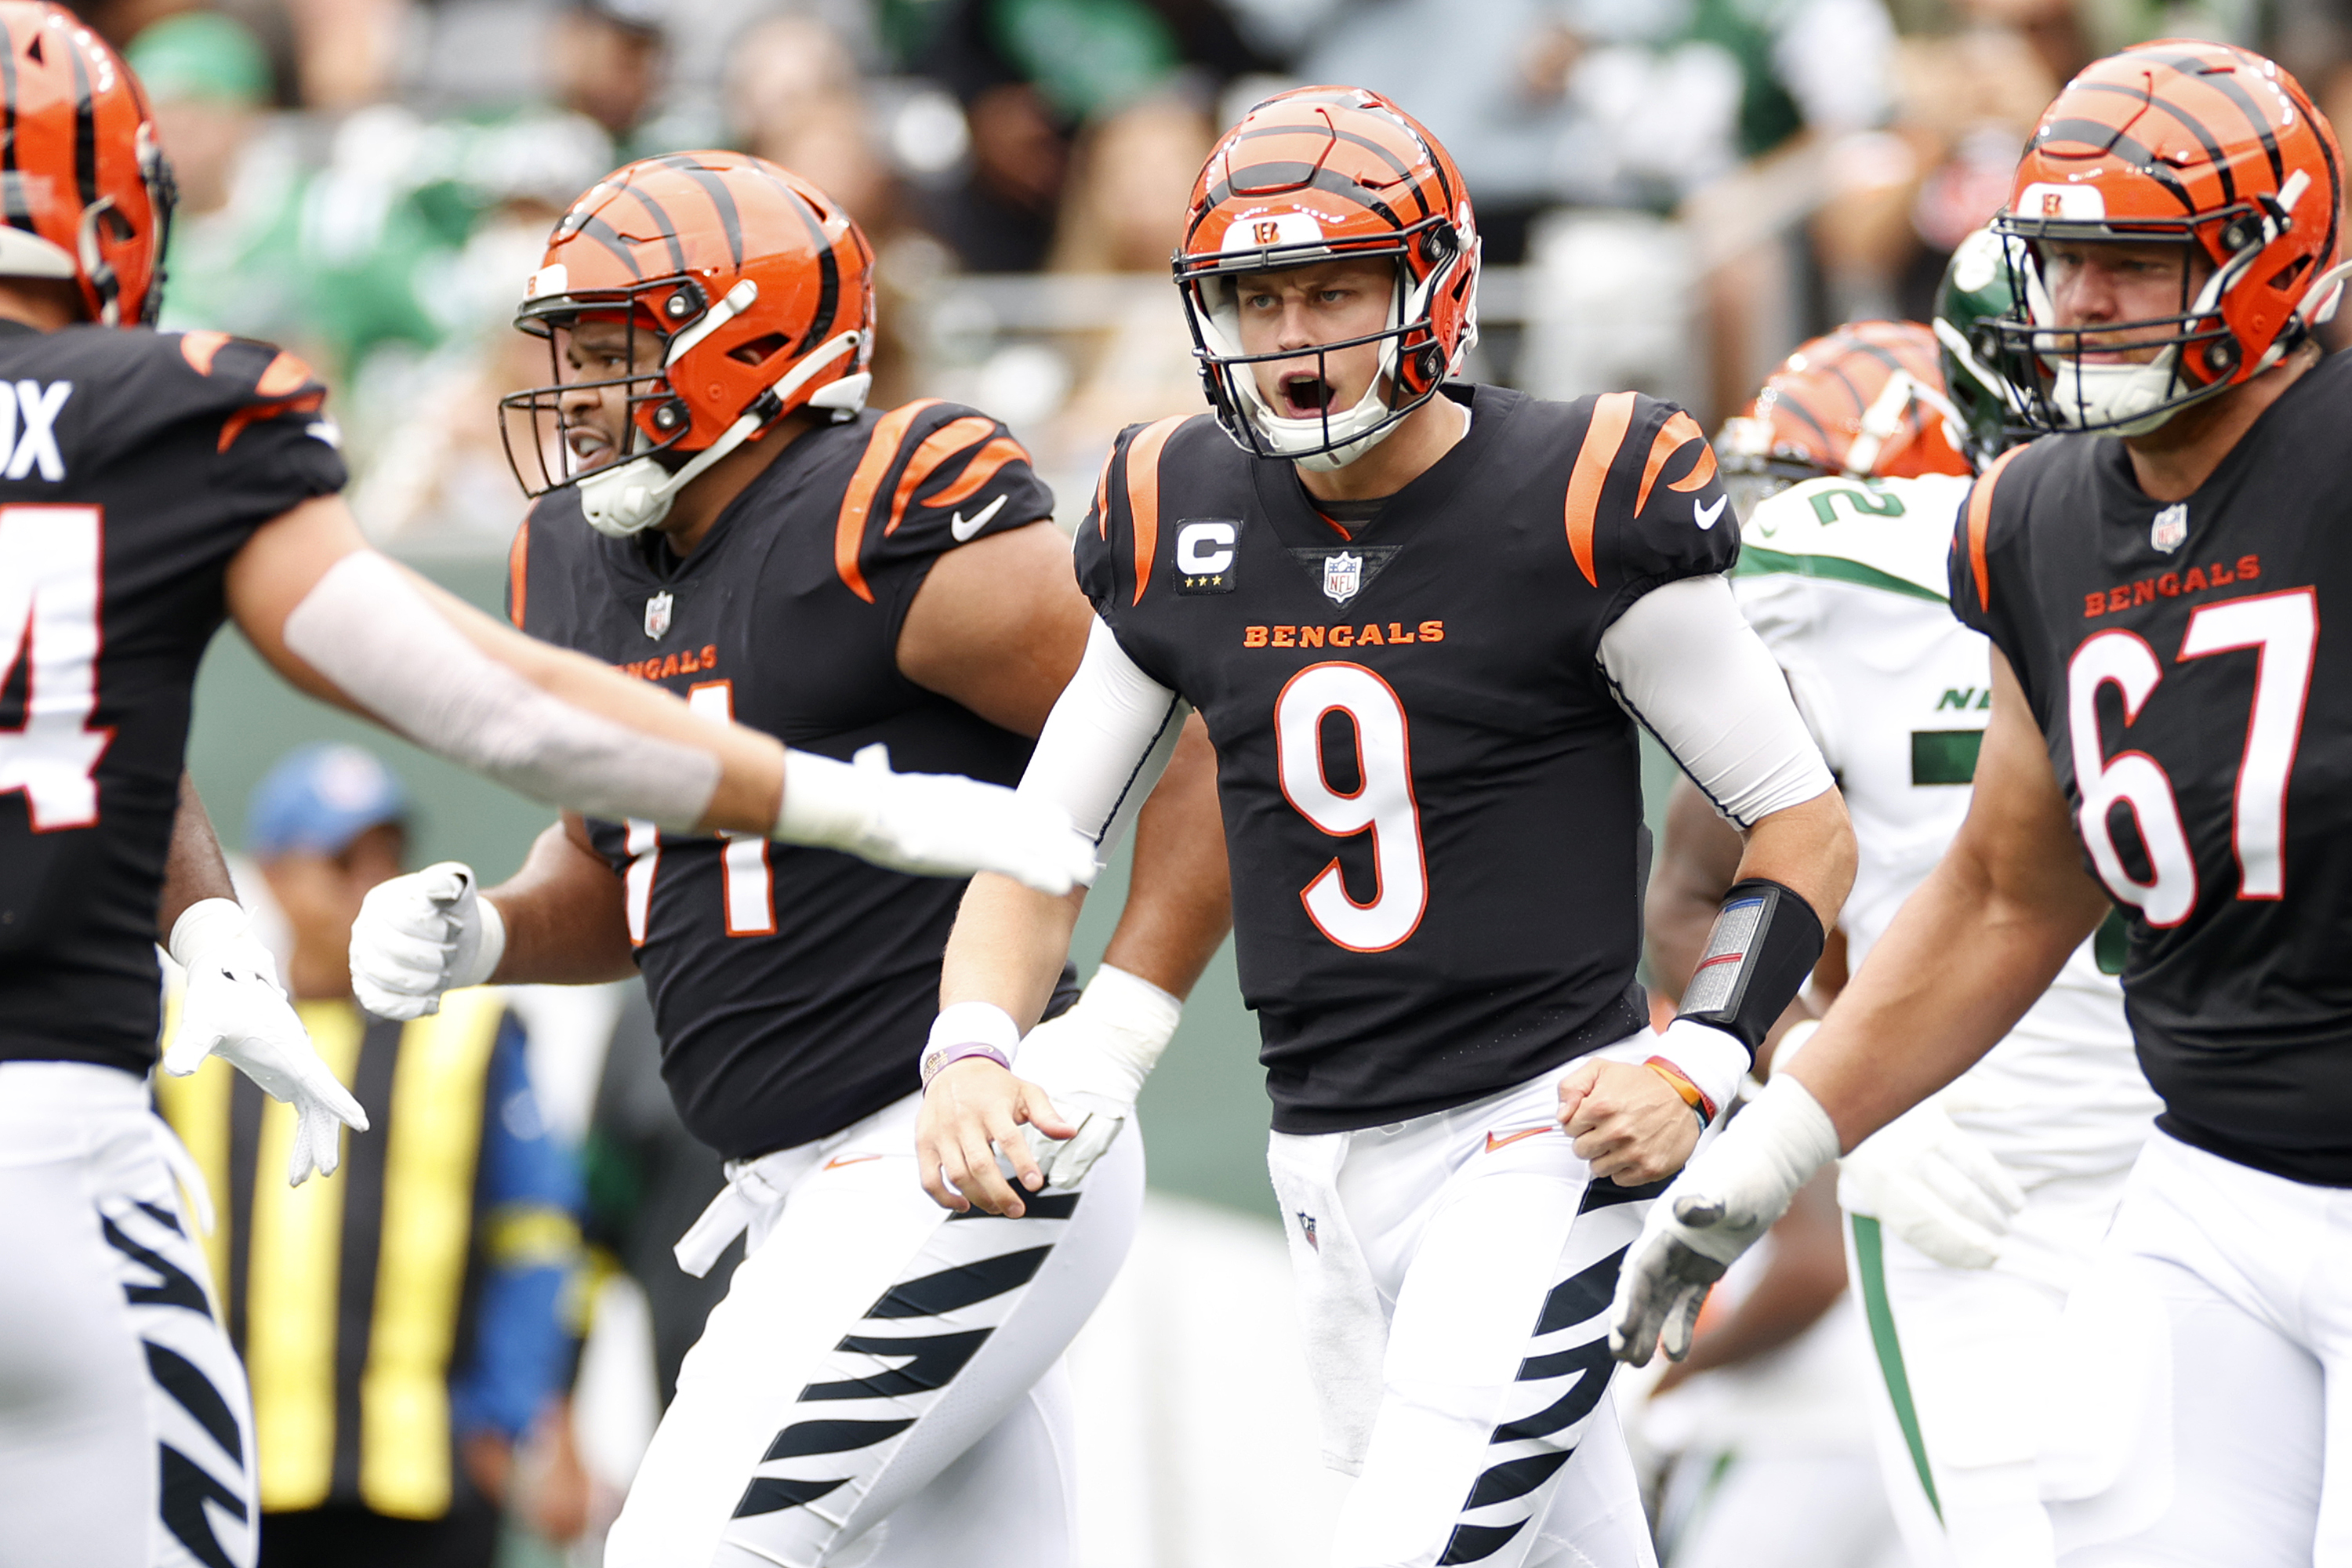 Bengals vs Dolphins score, recap and more from NFL Week 4 slugfest